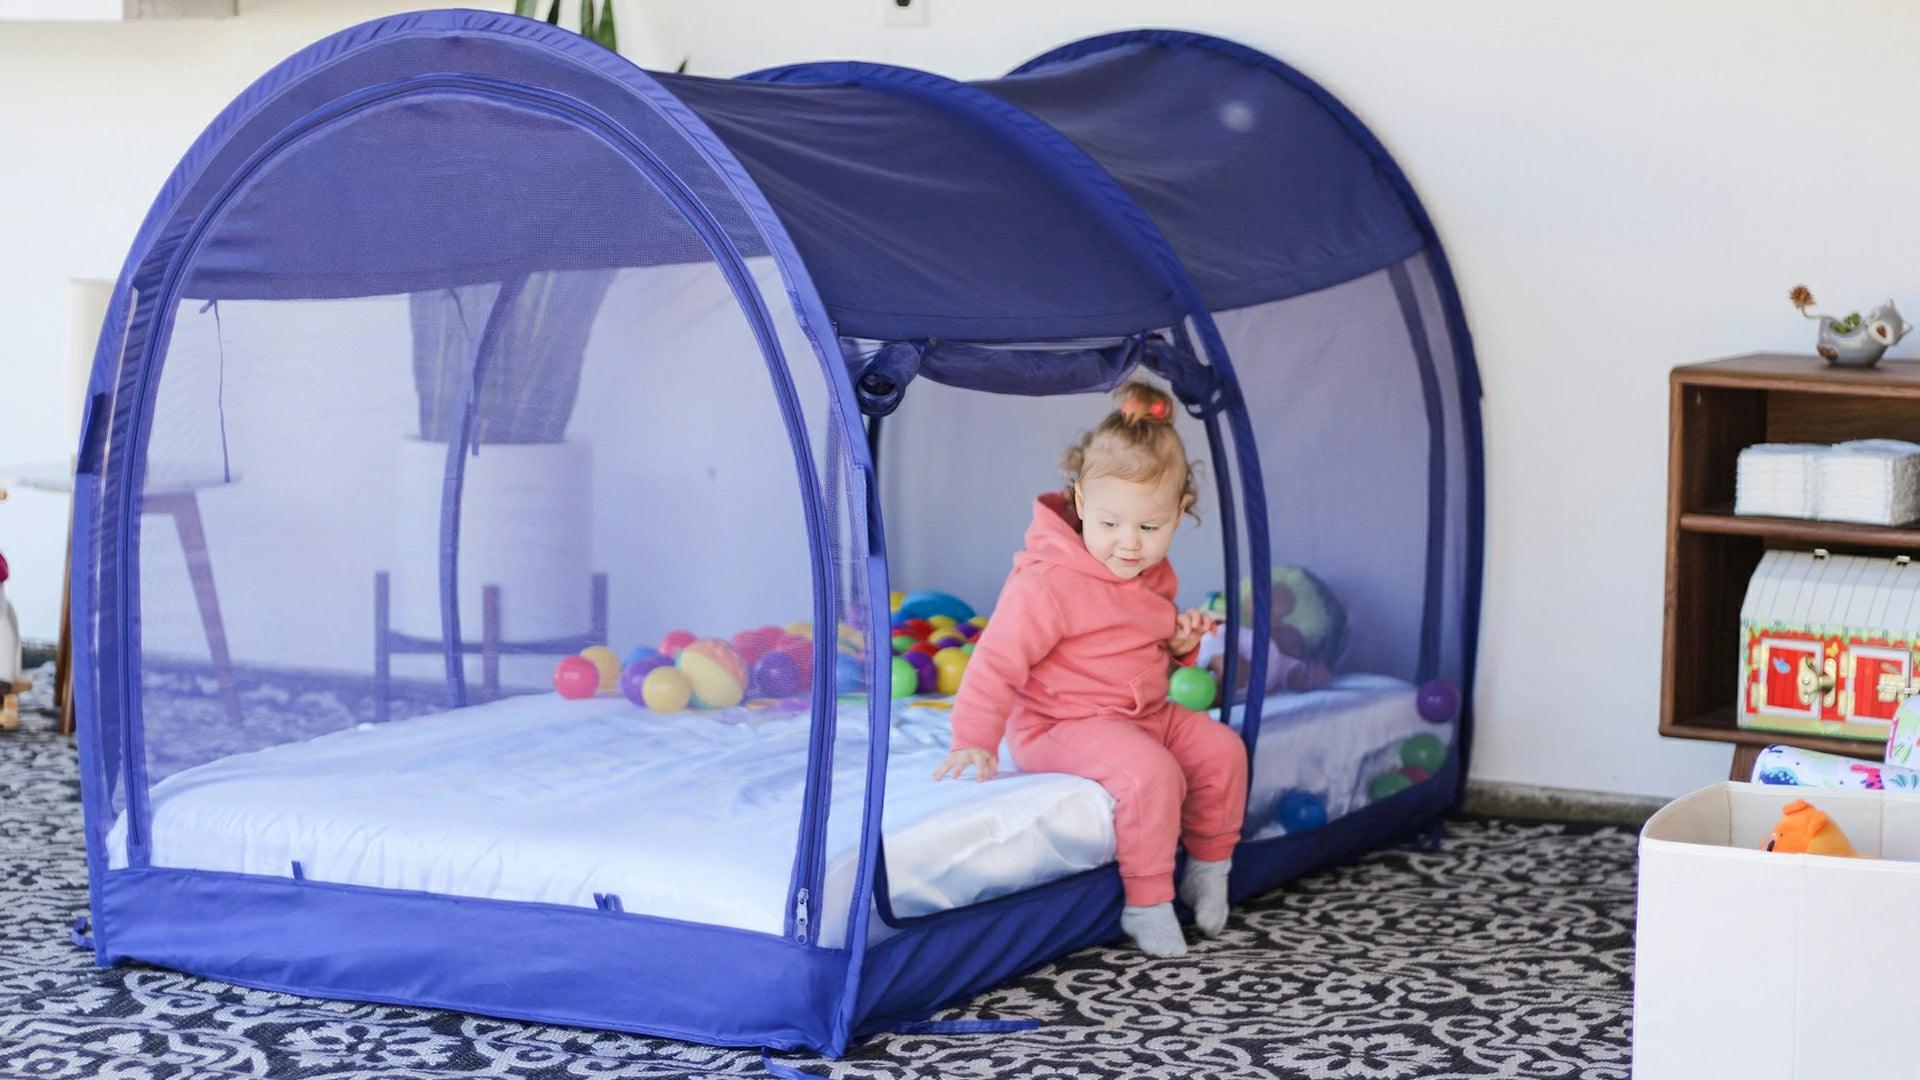 Alvantor’s Bed Tent With A Mosquito Net Brings Happiness To Your Life! - Alvantor